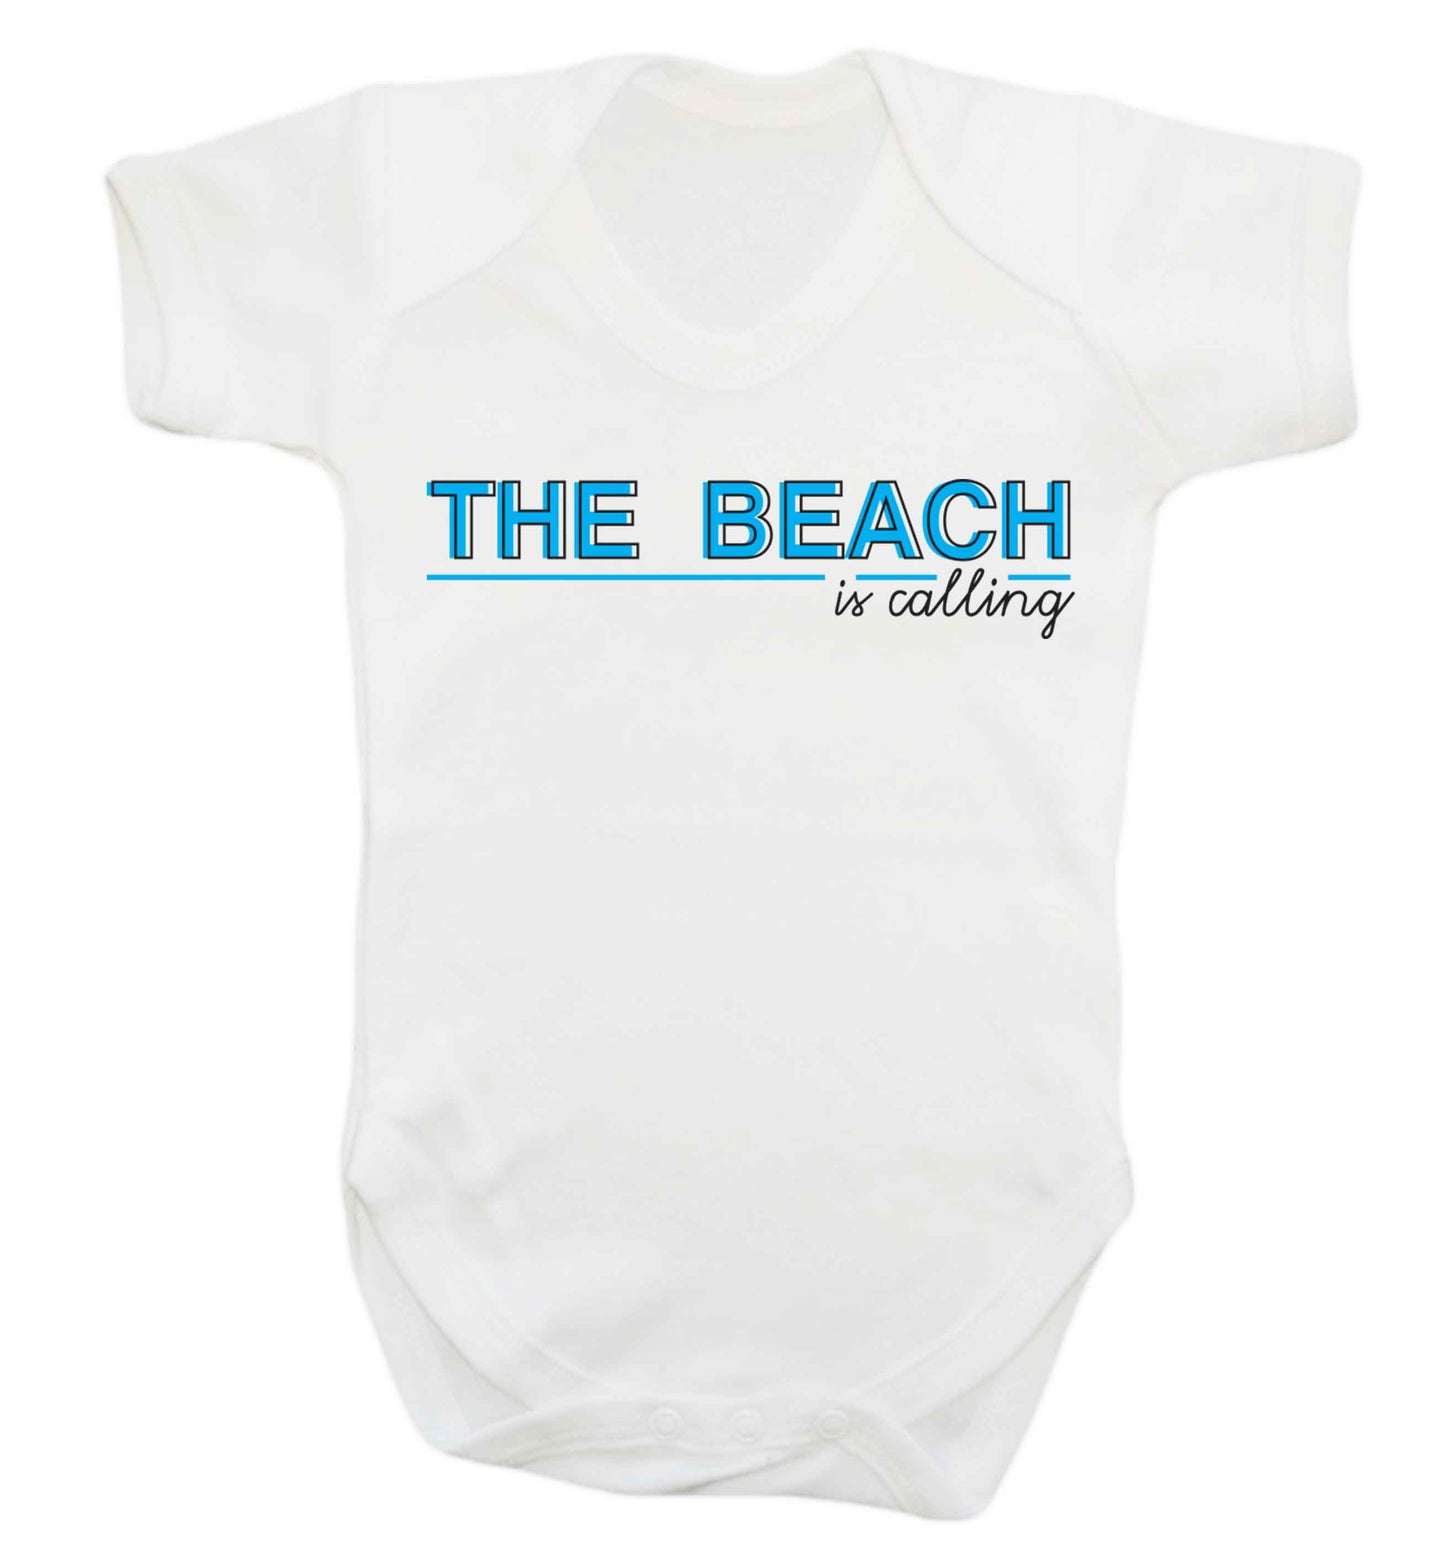 The beach is calling Baby Vest white 18-24 months